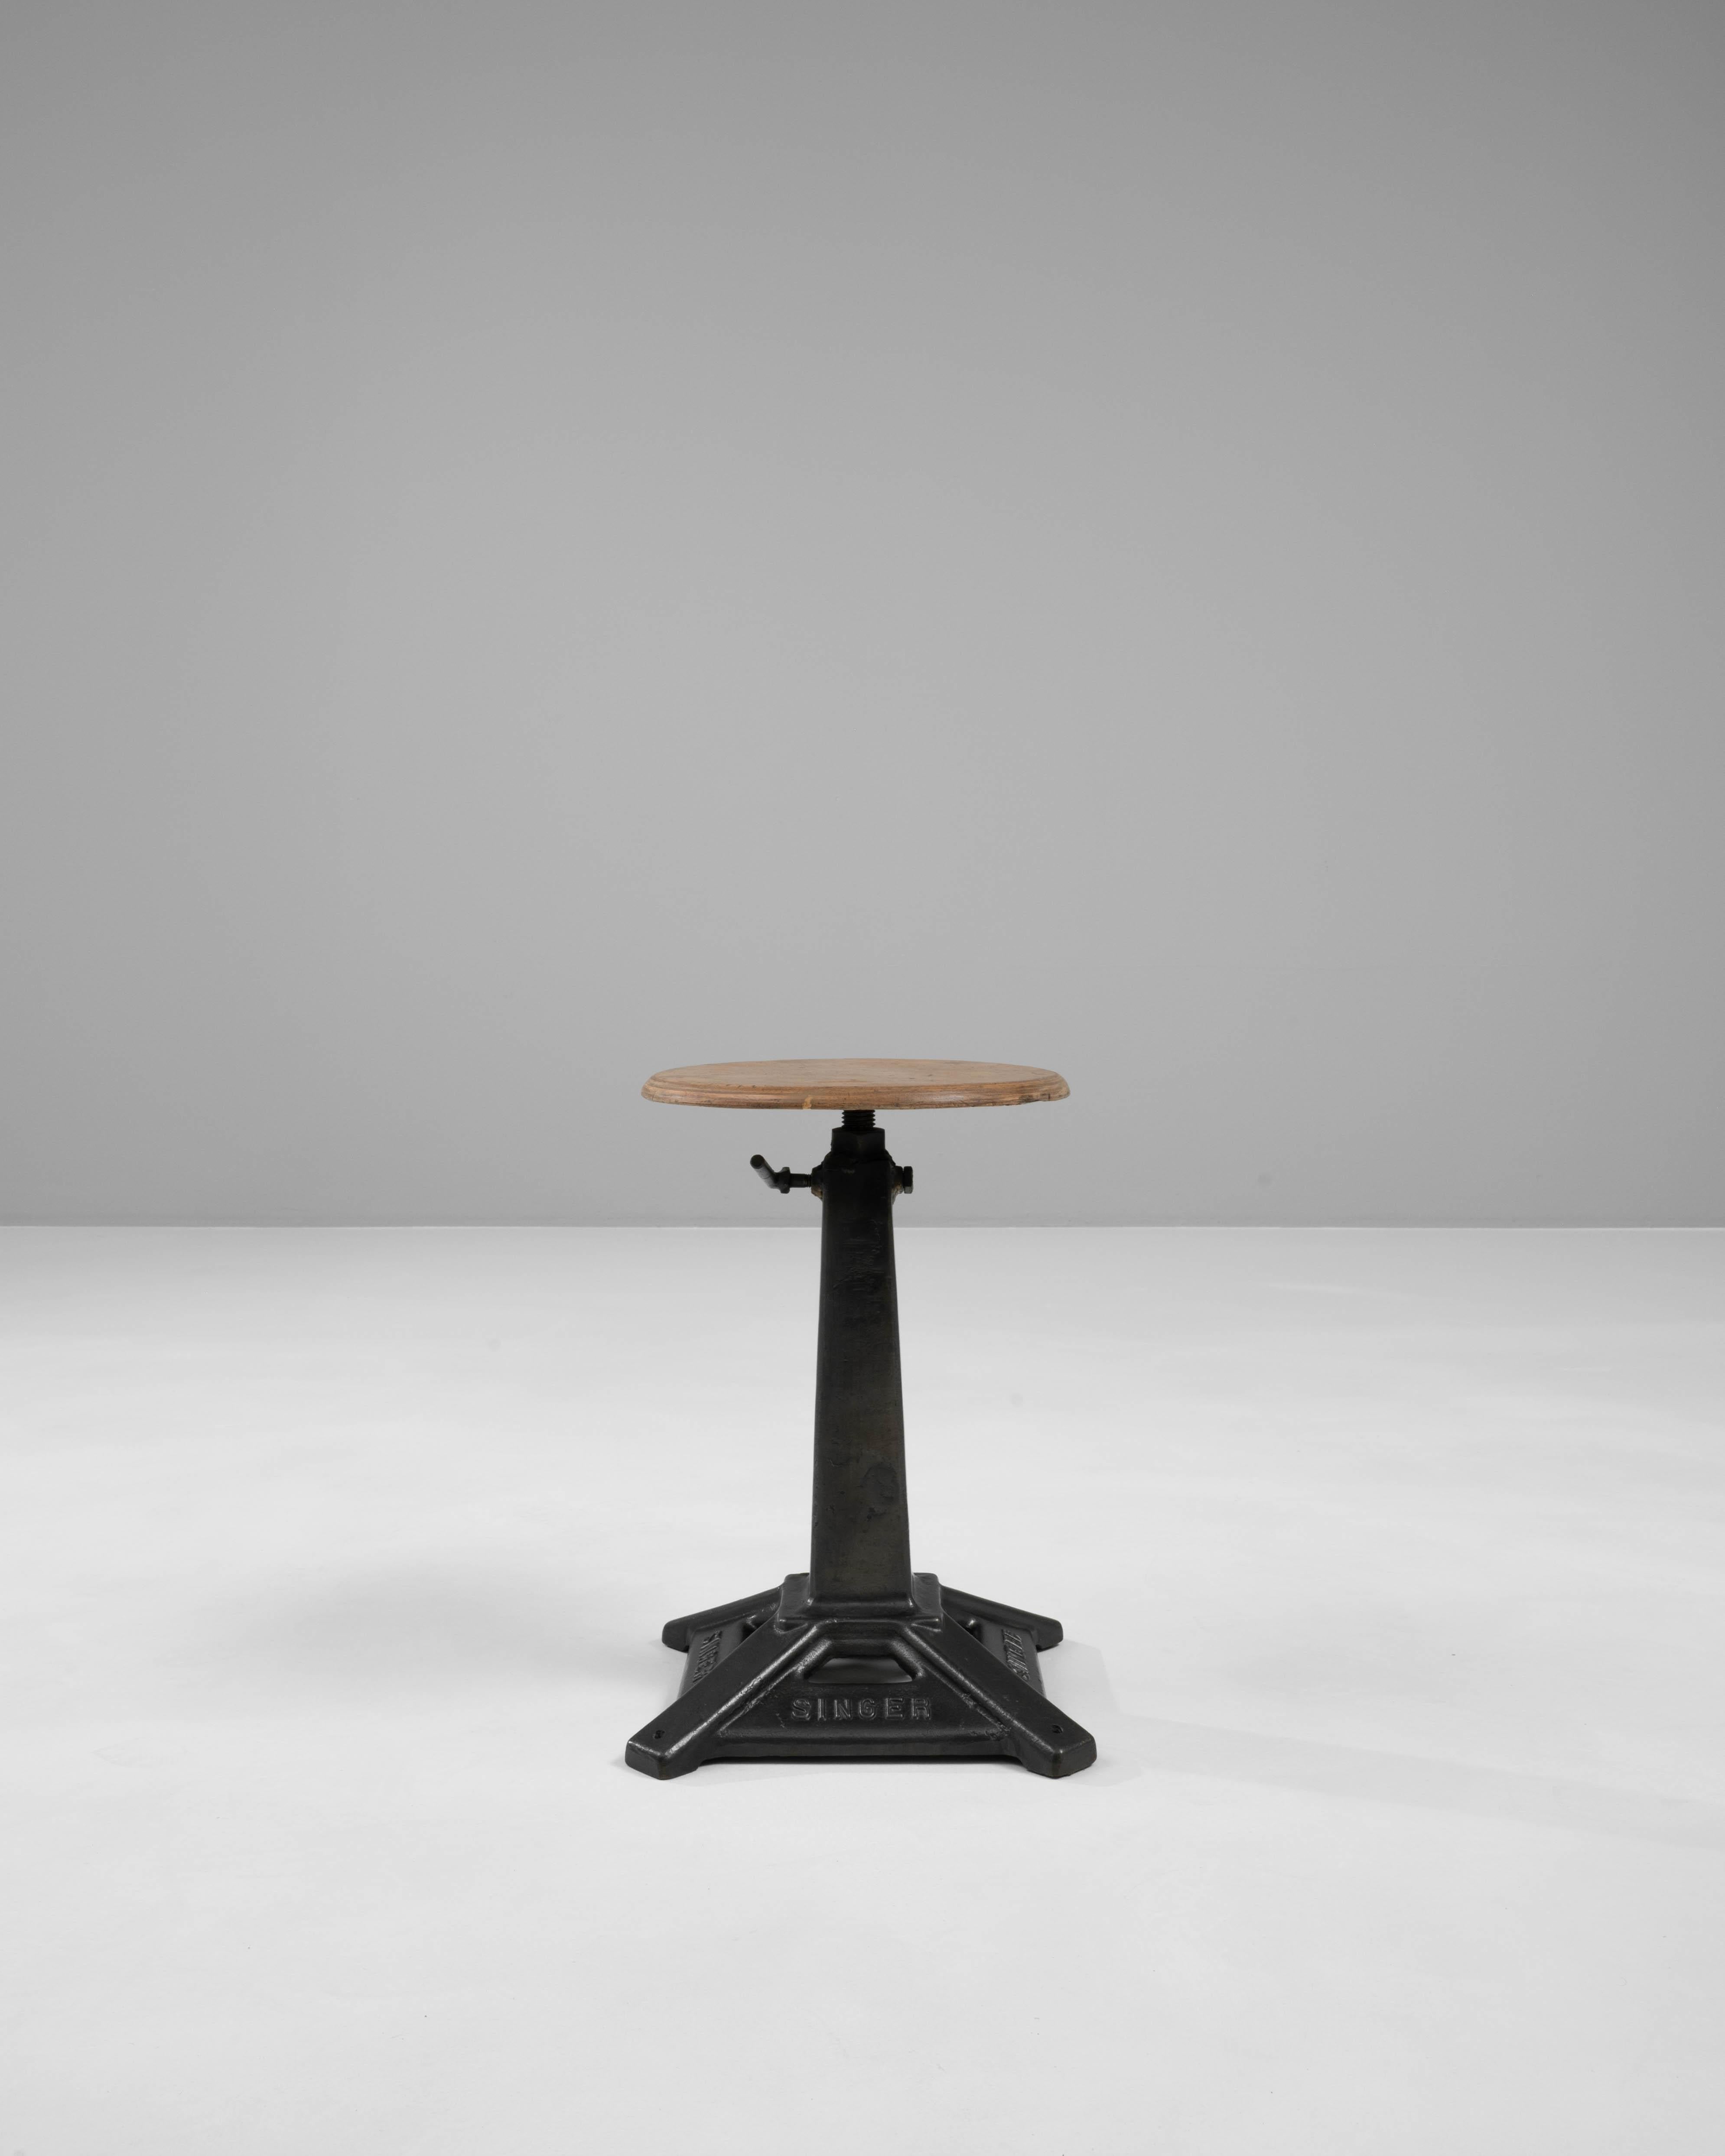 Introduce a touch of industrial chic to your space with this 20th Century French Metal & Wooden Seat. This unique piece combines robust metal and rustic wood, creating a striking contrast that captures the essence of industrial design. The sturdy